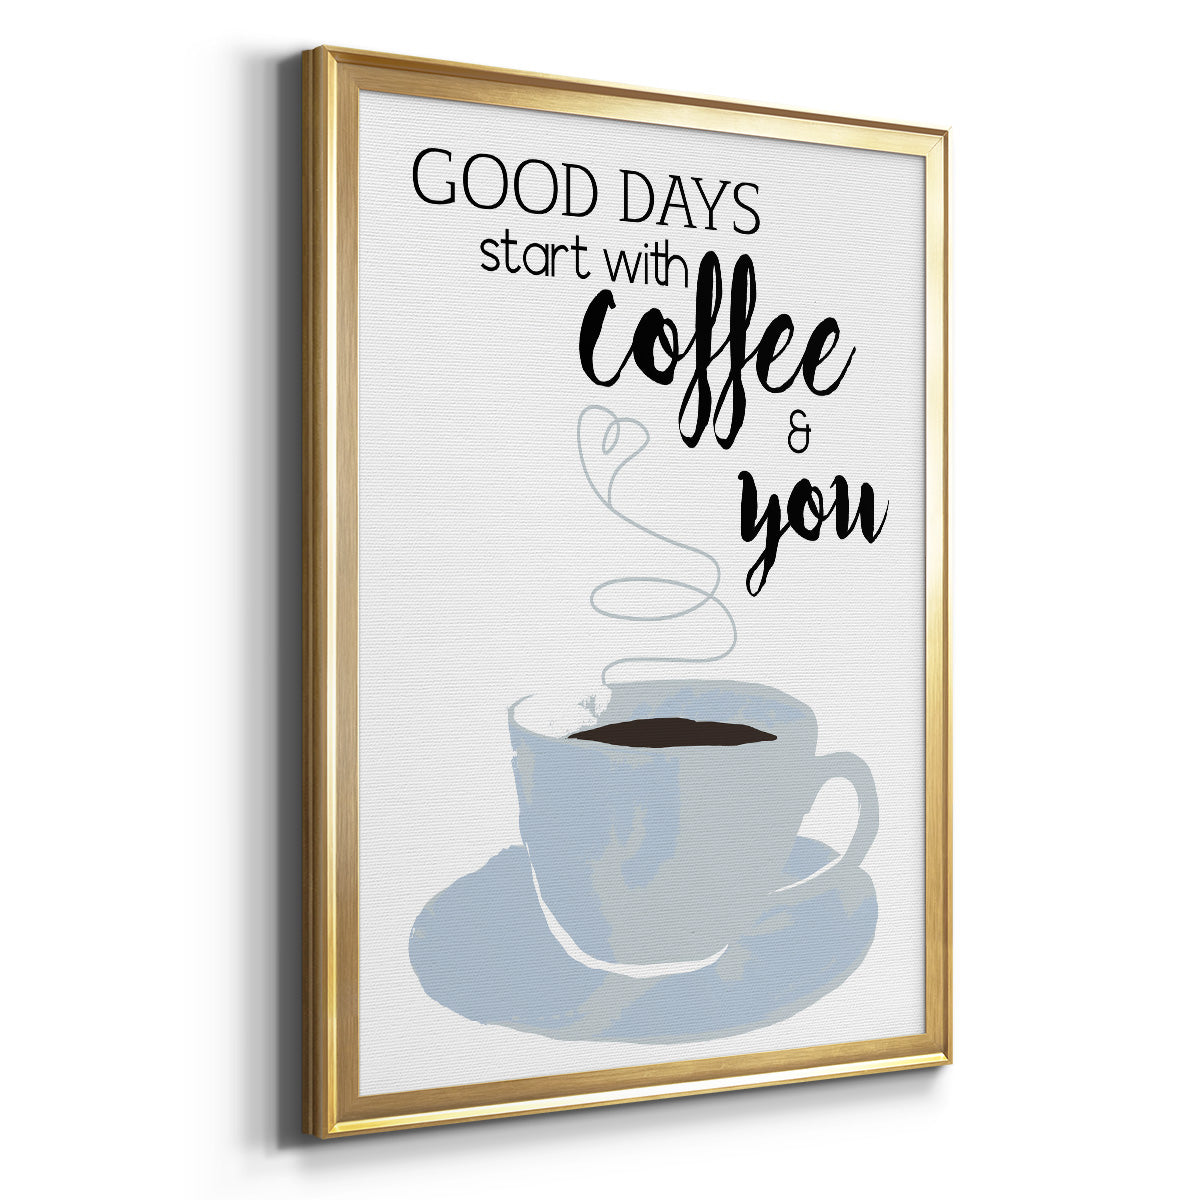 Start With Coffee & You Premium Framed Print - Ready to Hang